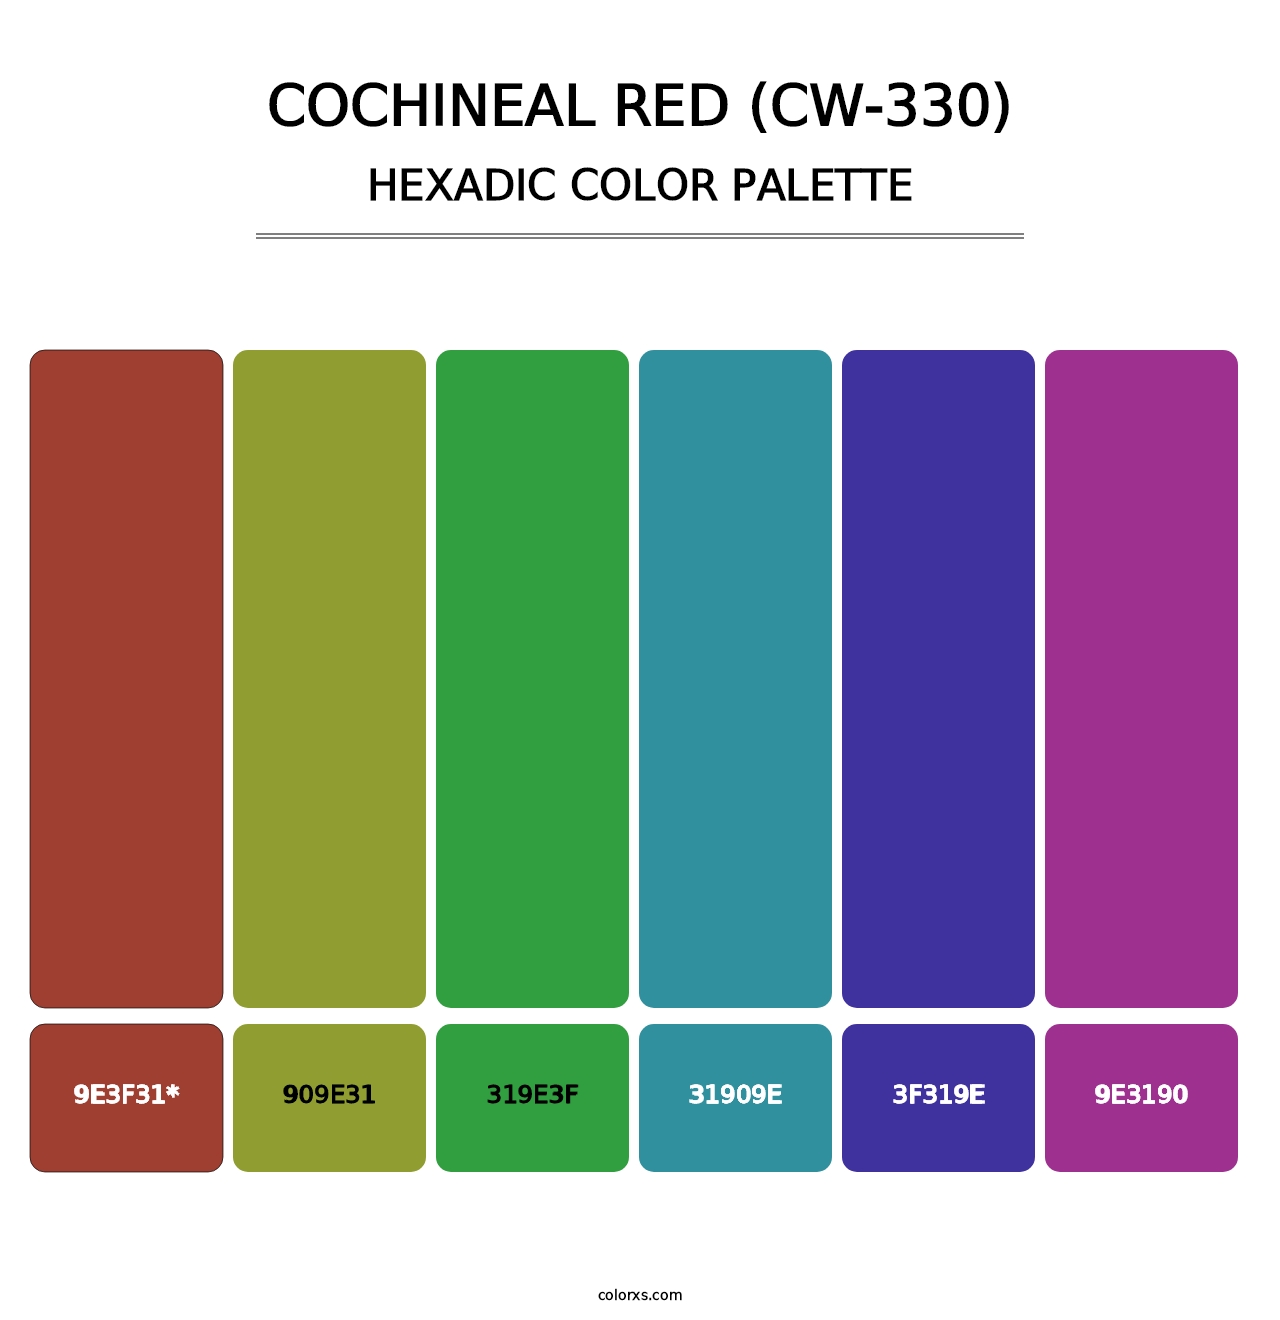 Cochineal Red (CW-330) - Hexadic Color Palette